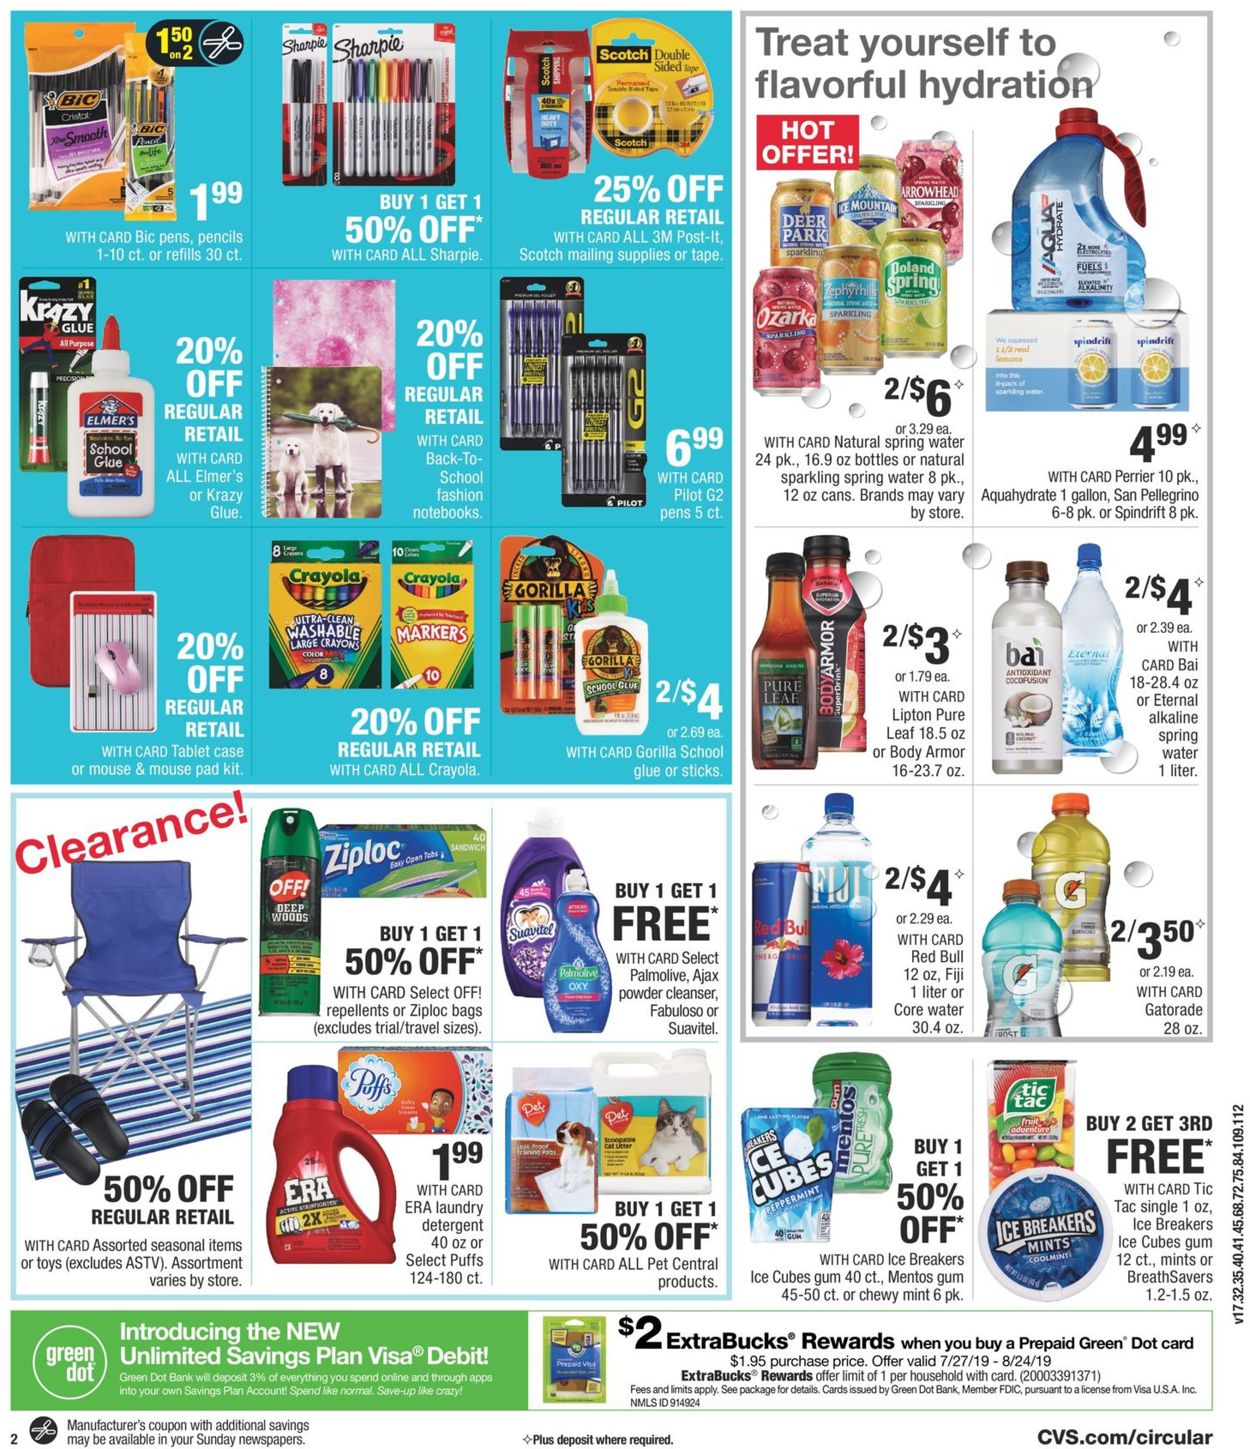 Cvs Pharmacy Current Weekly Ad 08 11 08 17 19 3 Frequent Ads Com